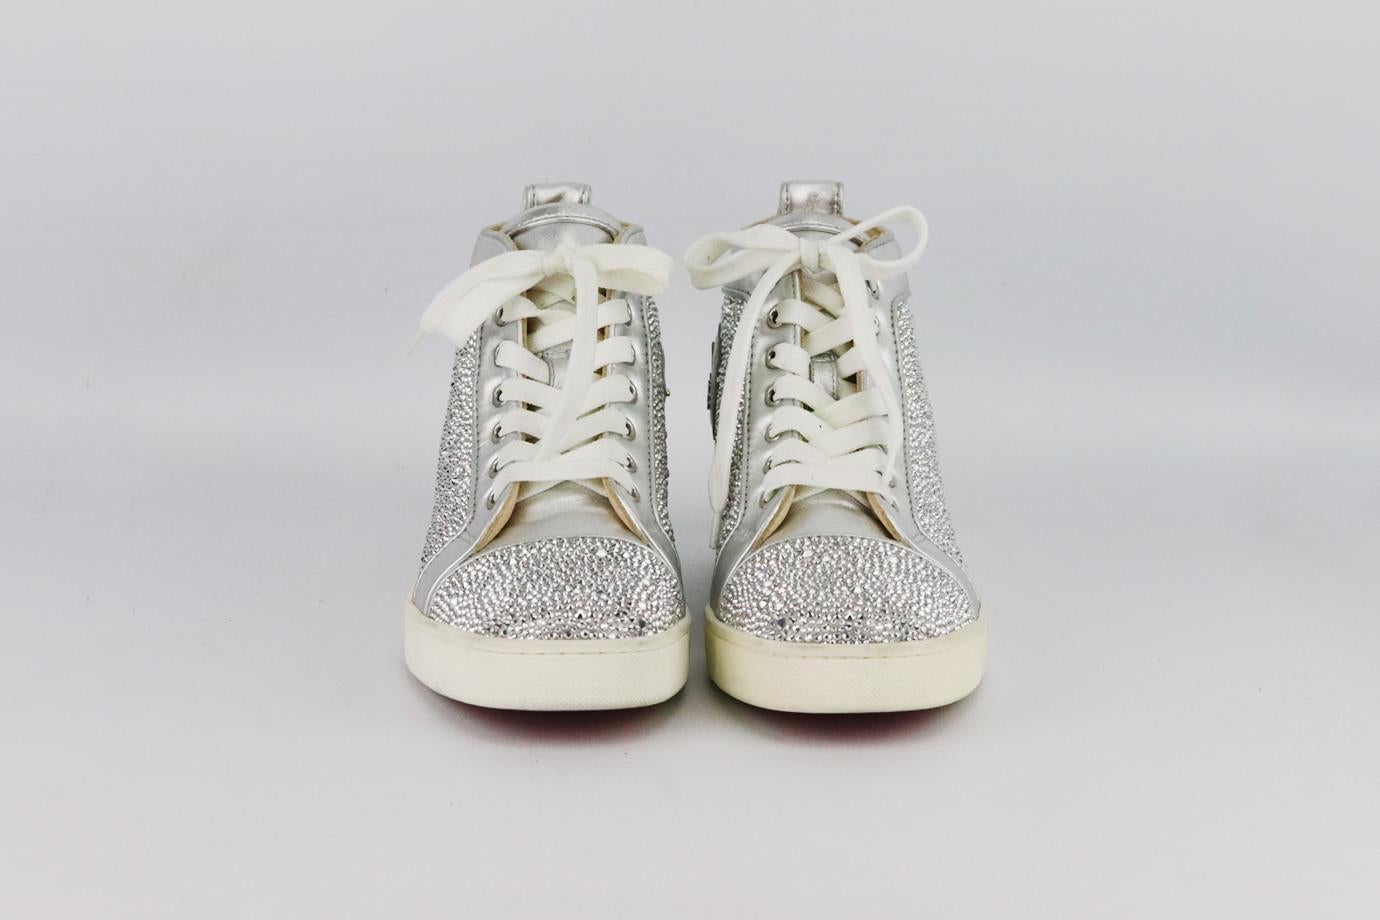 Christian Louboutin Louis embellished leather high top sneakers. Made from silver leather with crystal embellishment throughout and finished with the brand’s iconic red sole. Silver. Lace up fastening at front. Does not come with box or dustbag.